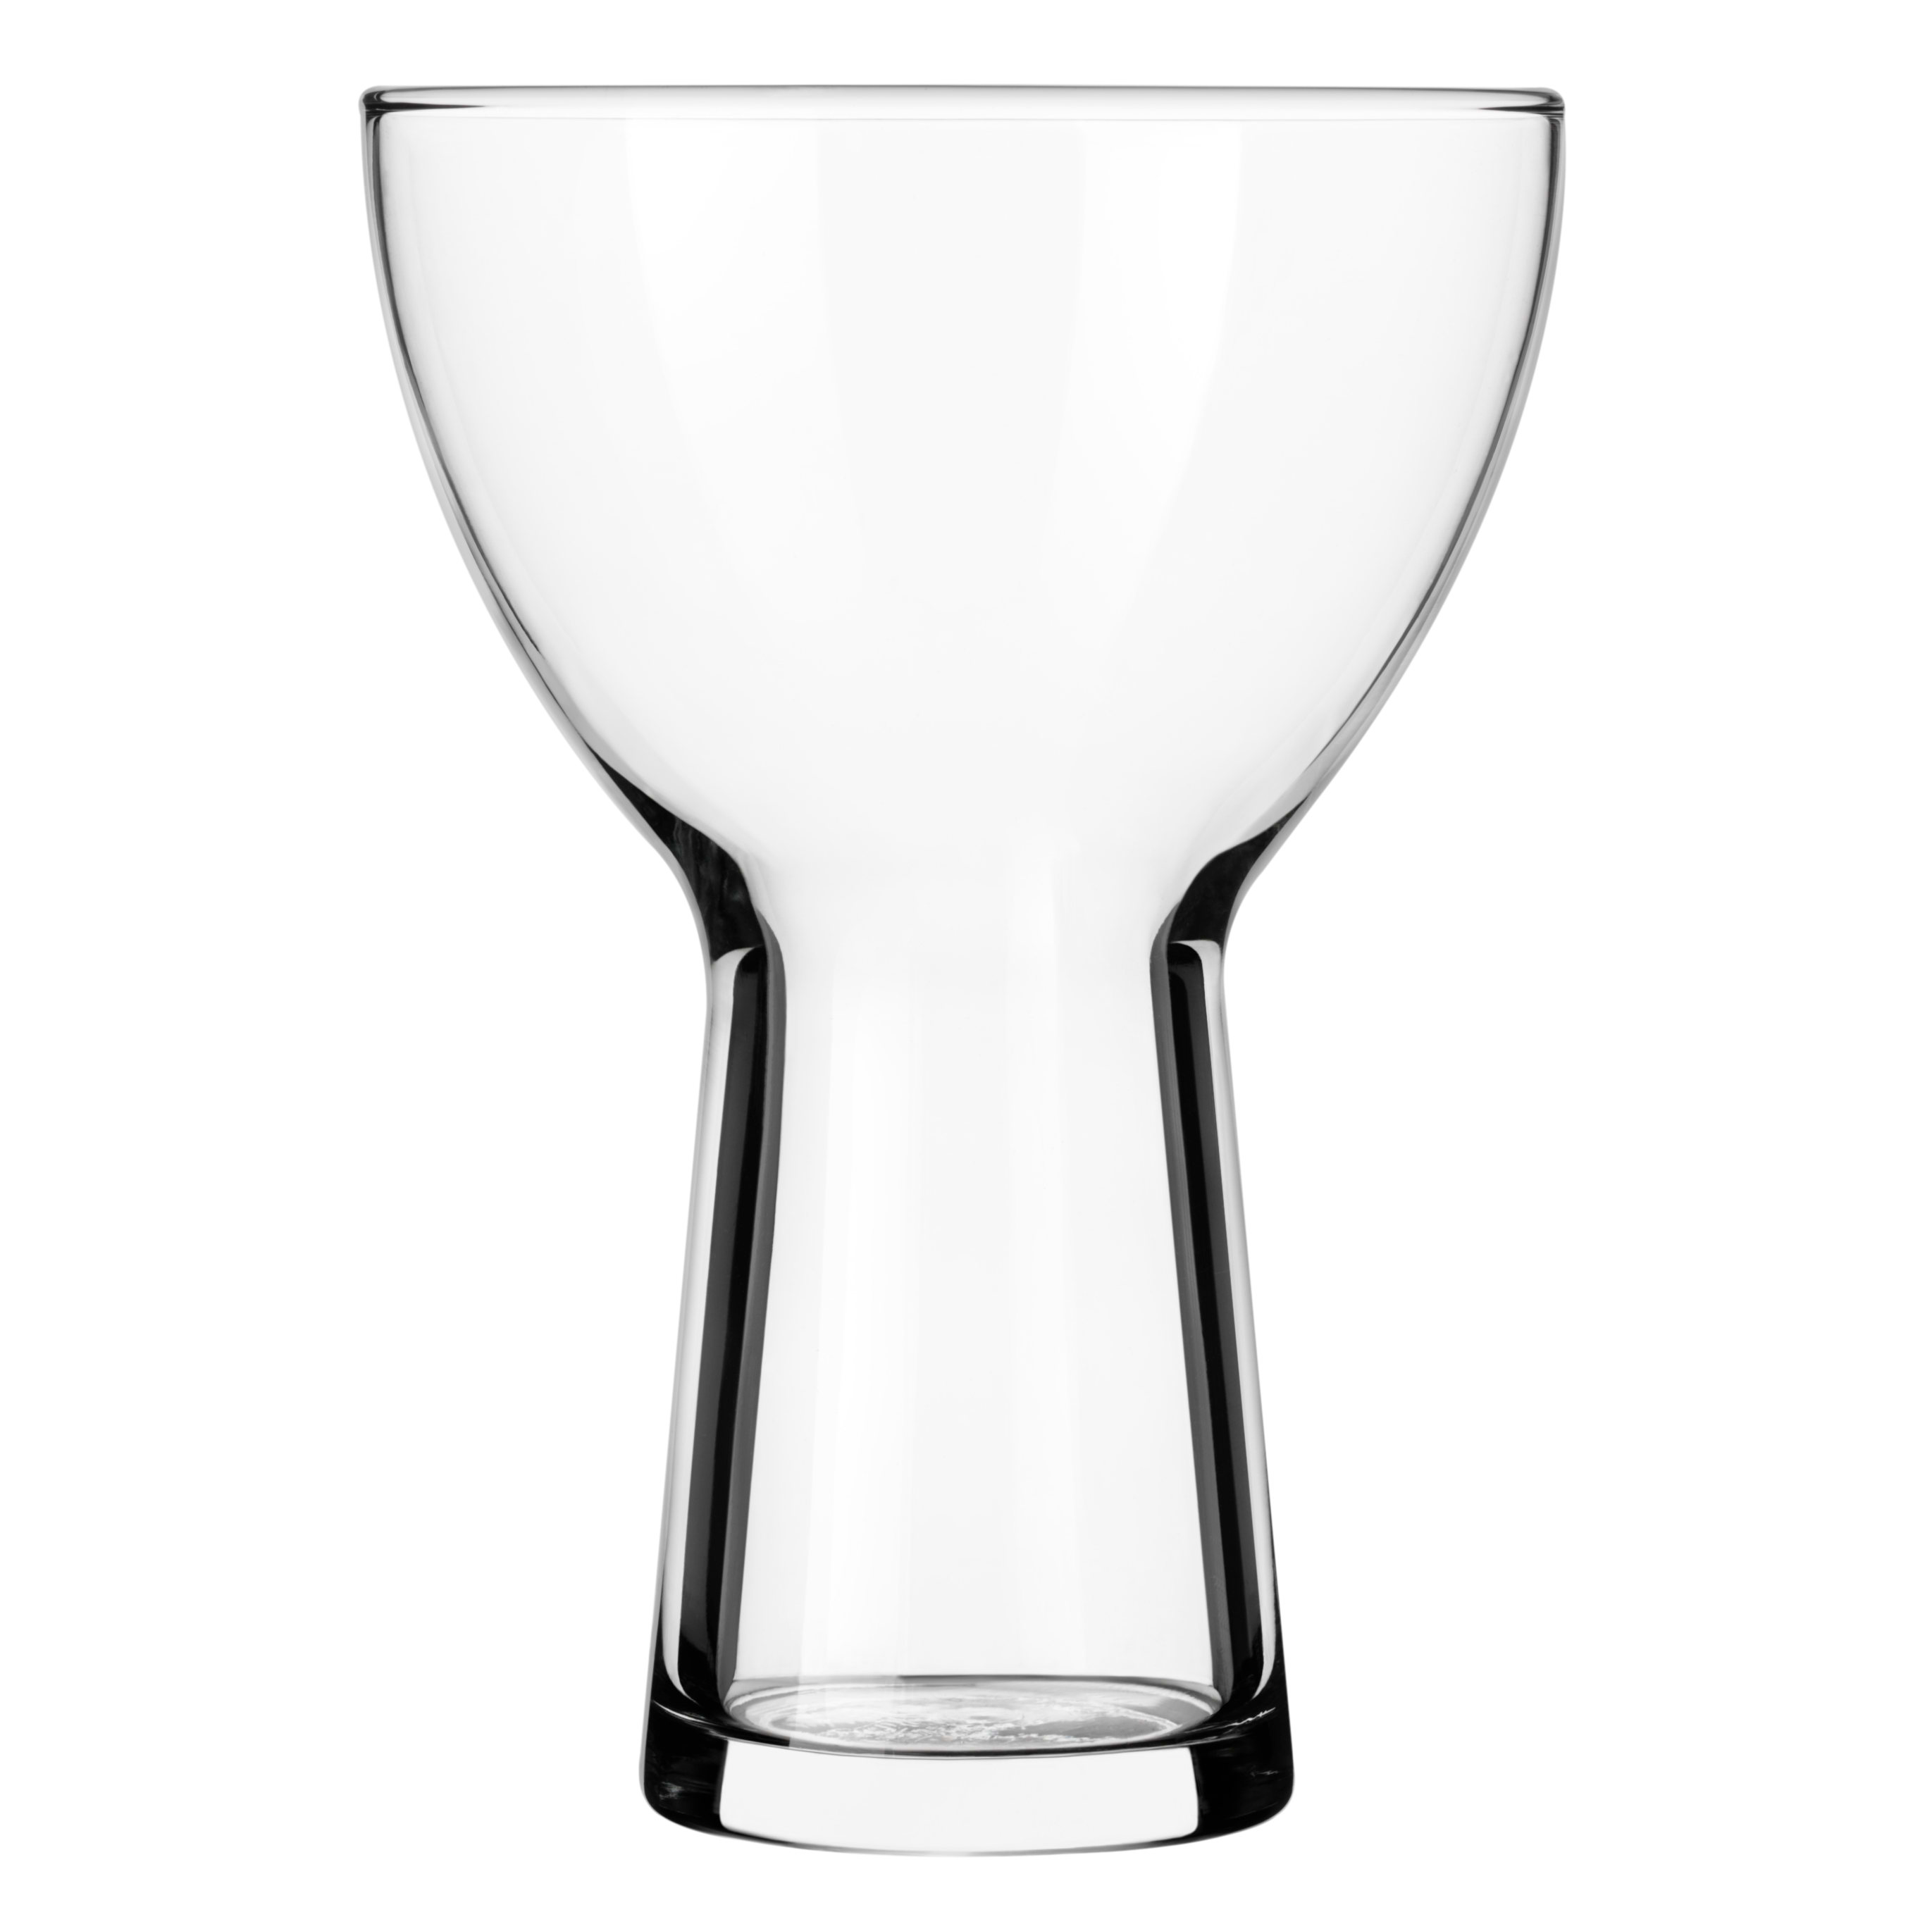 Libbey 1101 Symbio Cocktail Glass, 15 Ounce, Clear